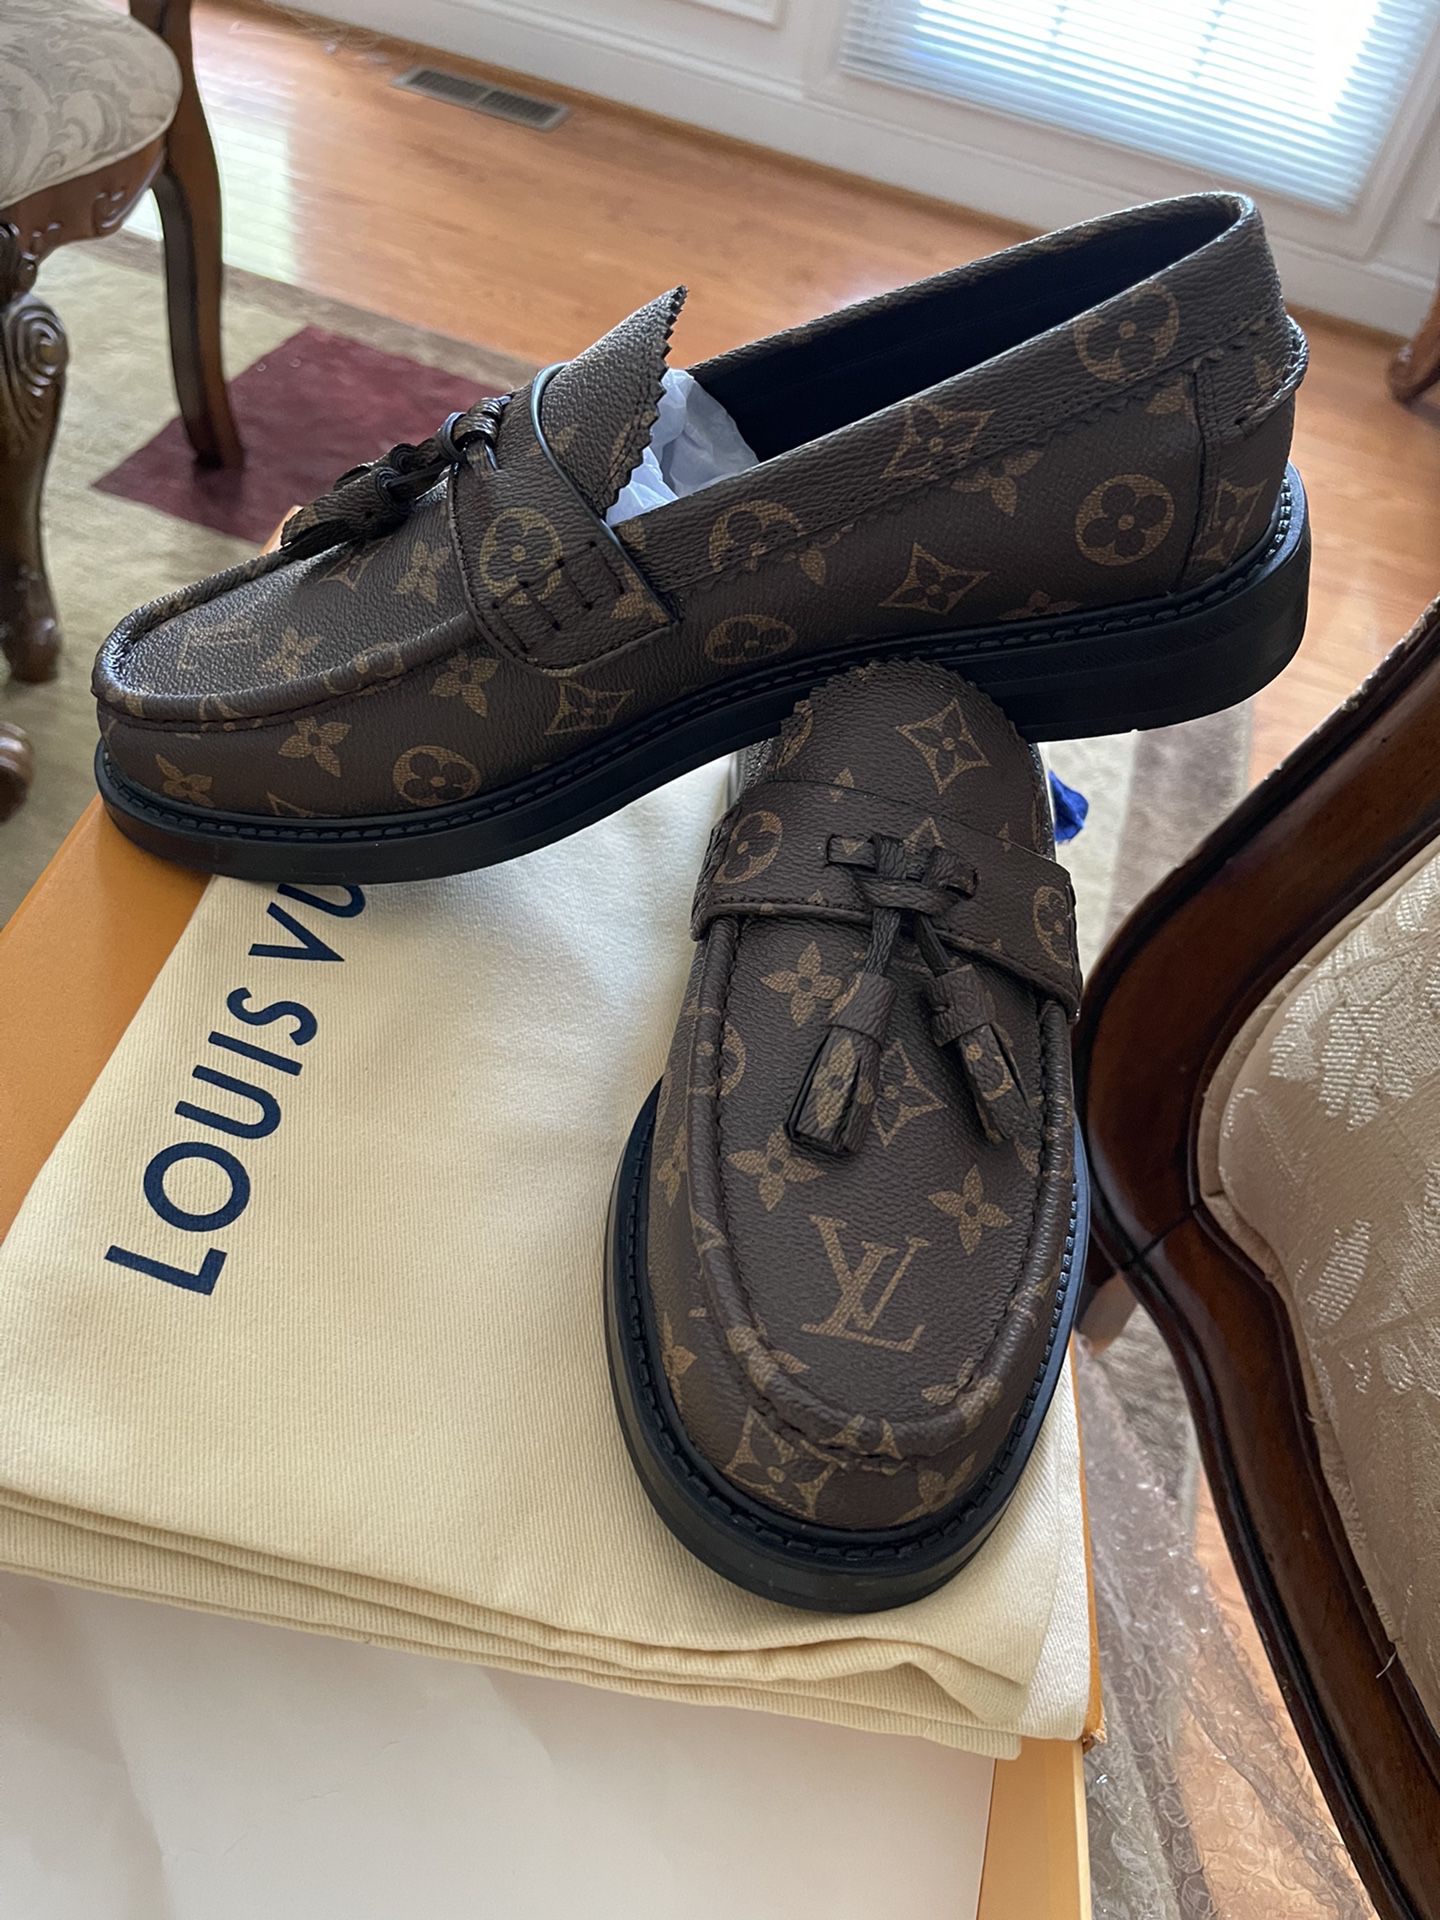 Louis Vuitton Voltaire Loafer Sizes 37-45 for Sale in Laurel, MD - OfferUp